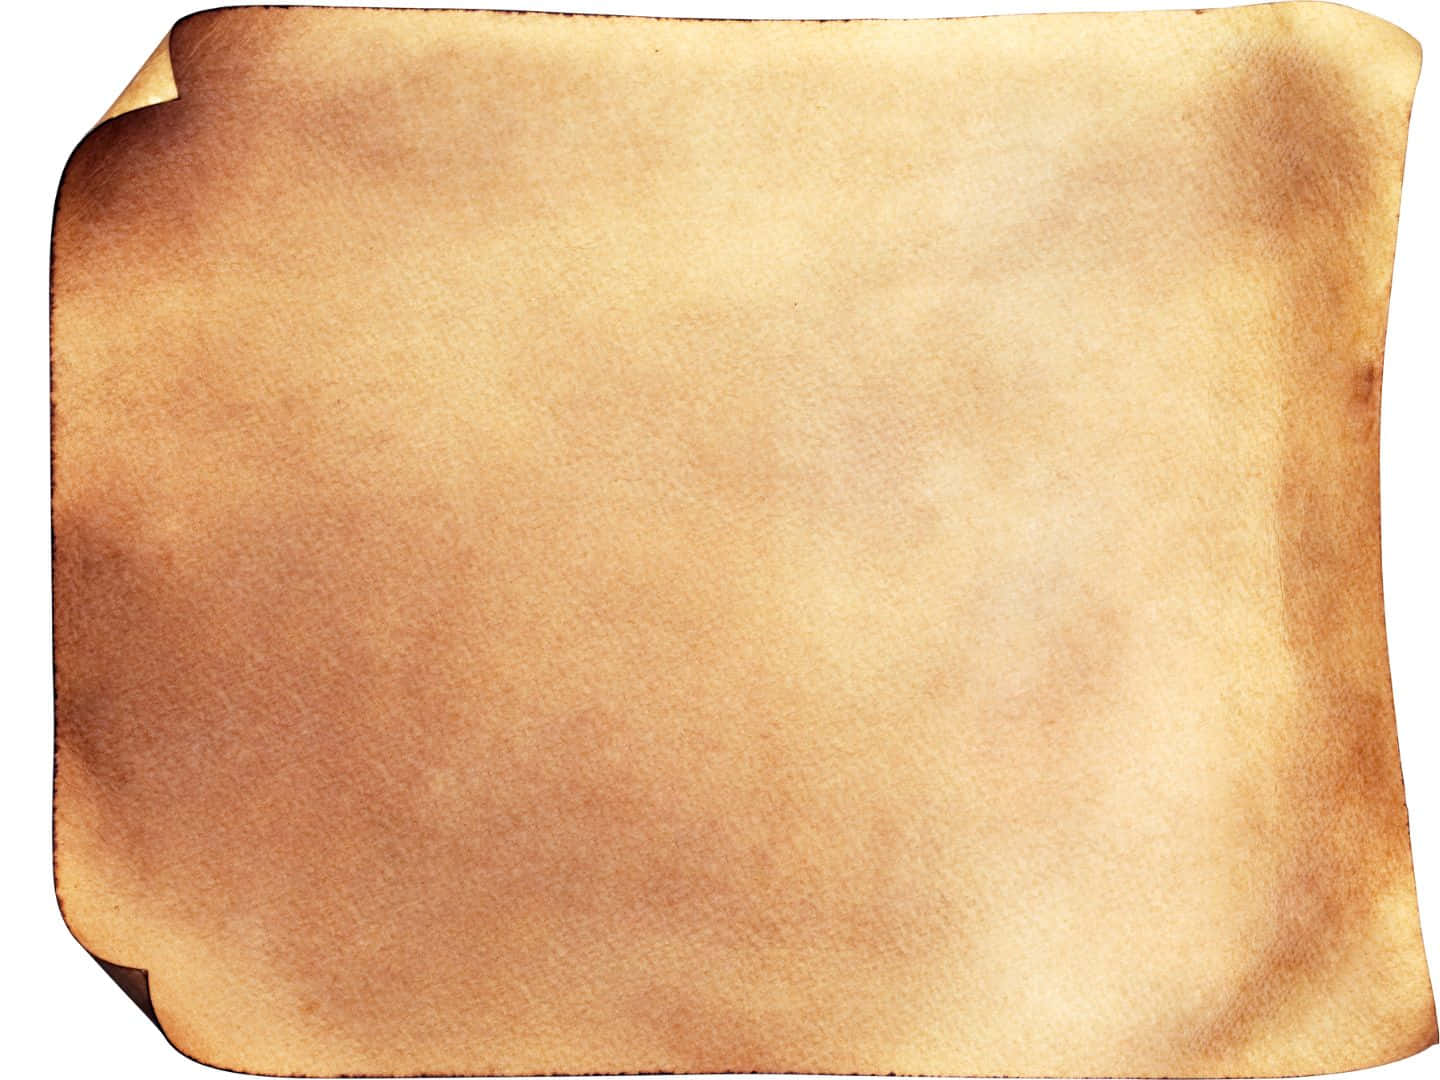 Parchment Background With Folded Edges